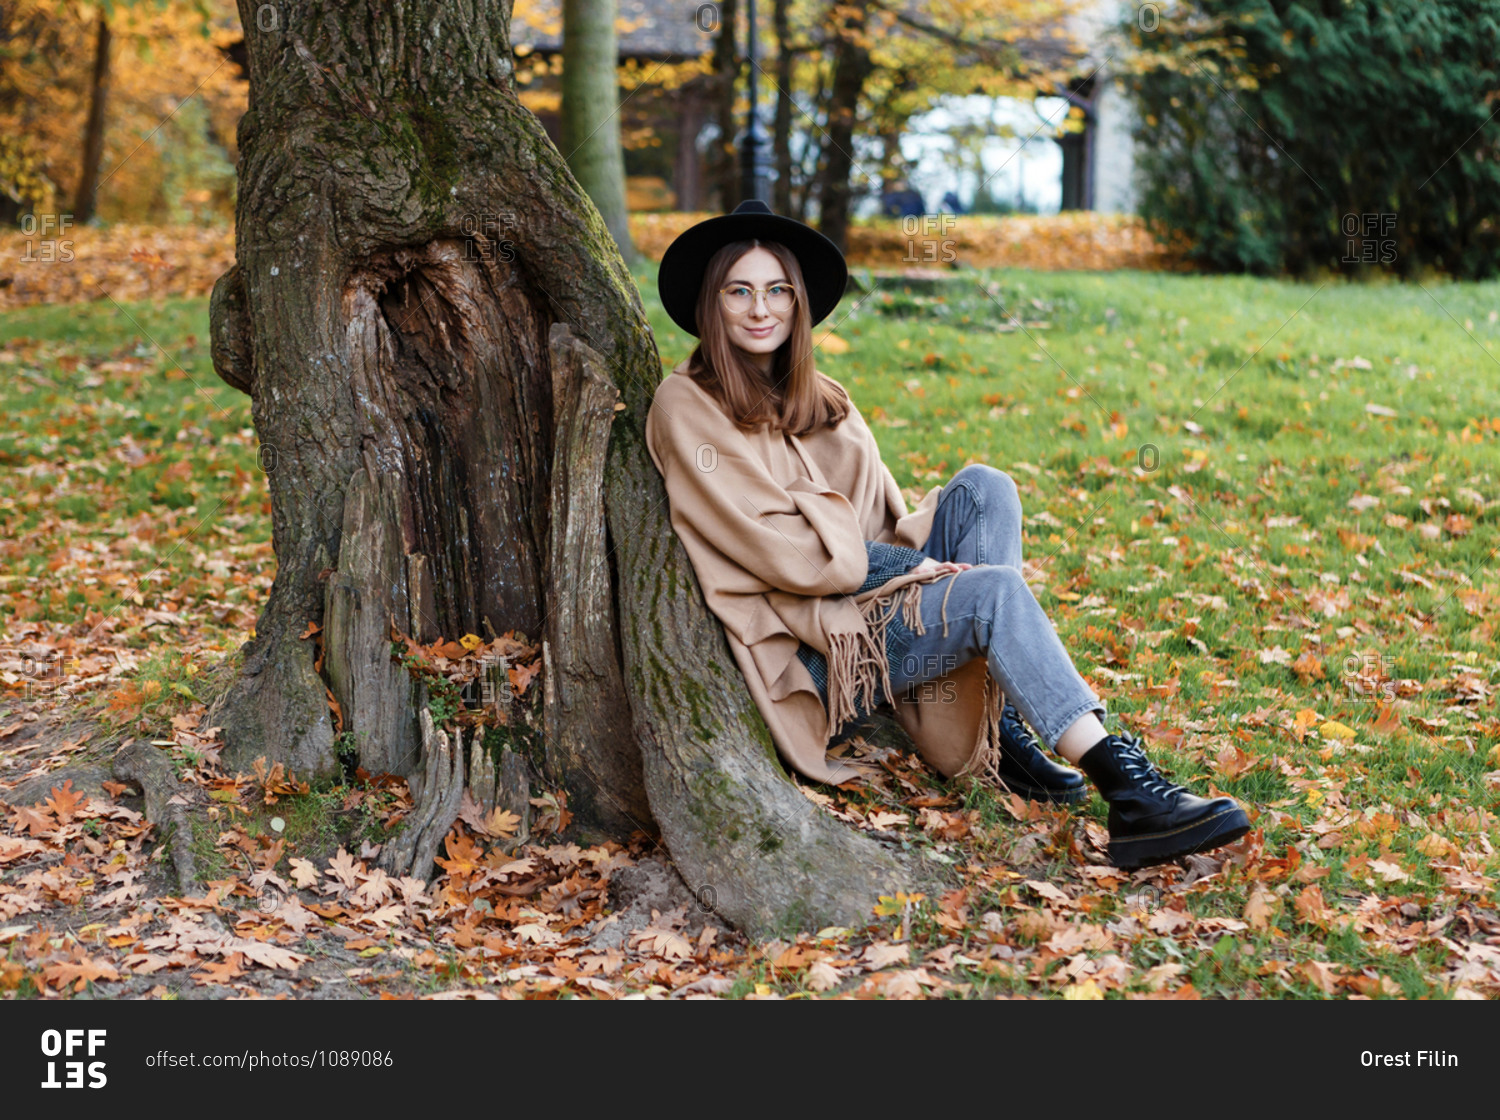 A young woman in a black hat and poncho is sitting under the tree on the grass in the park in the autumn season